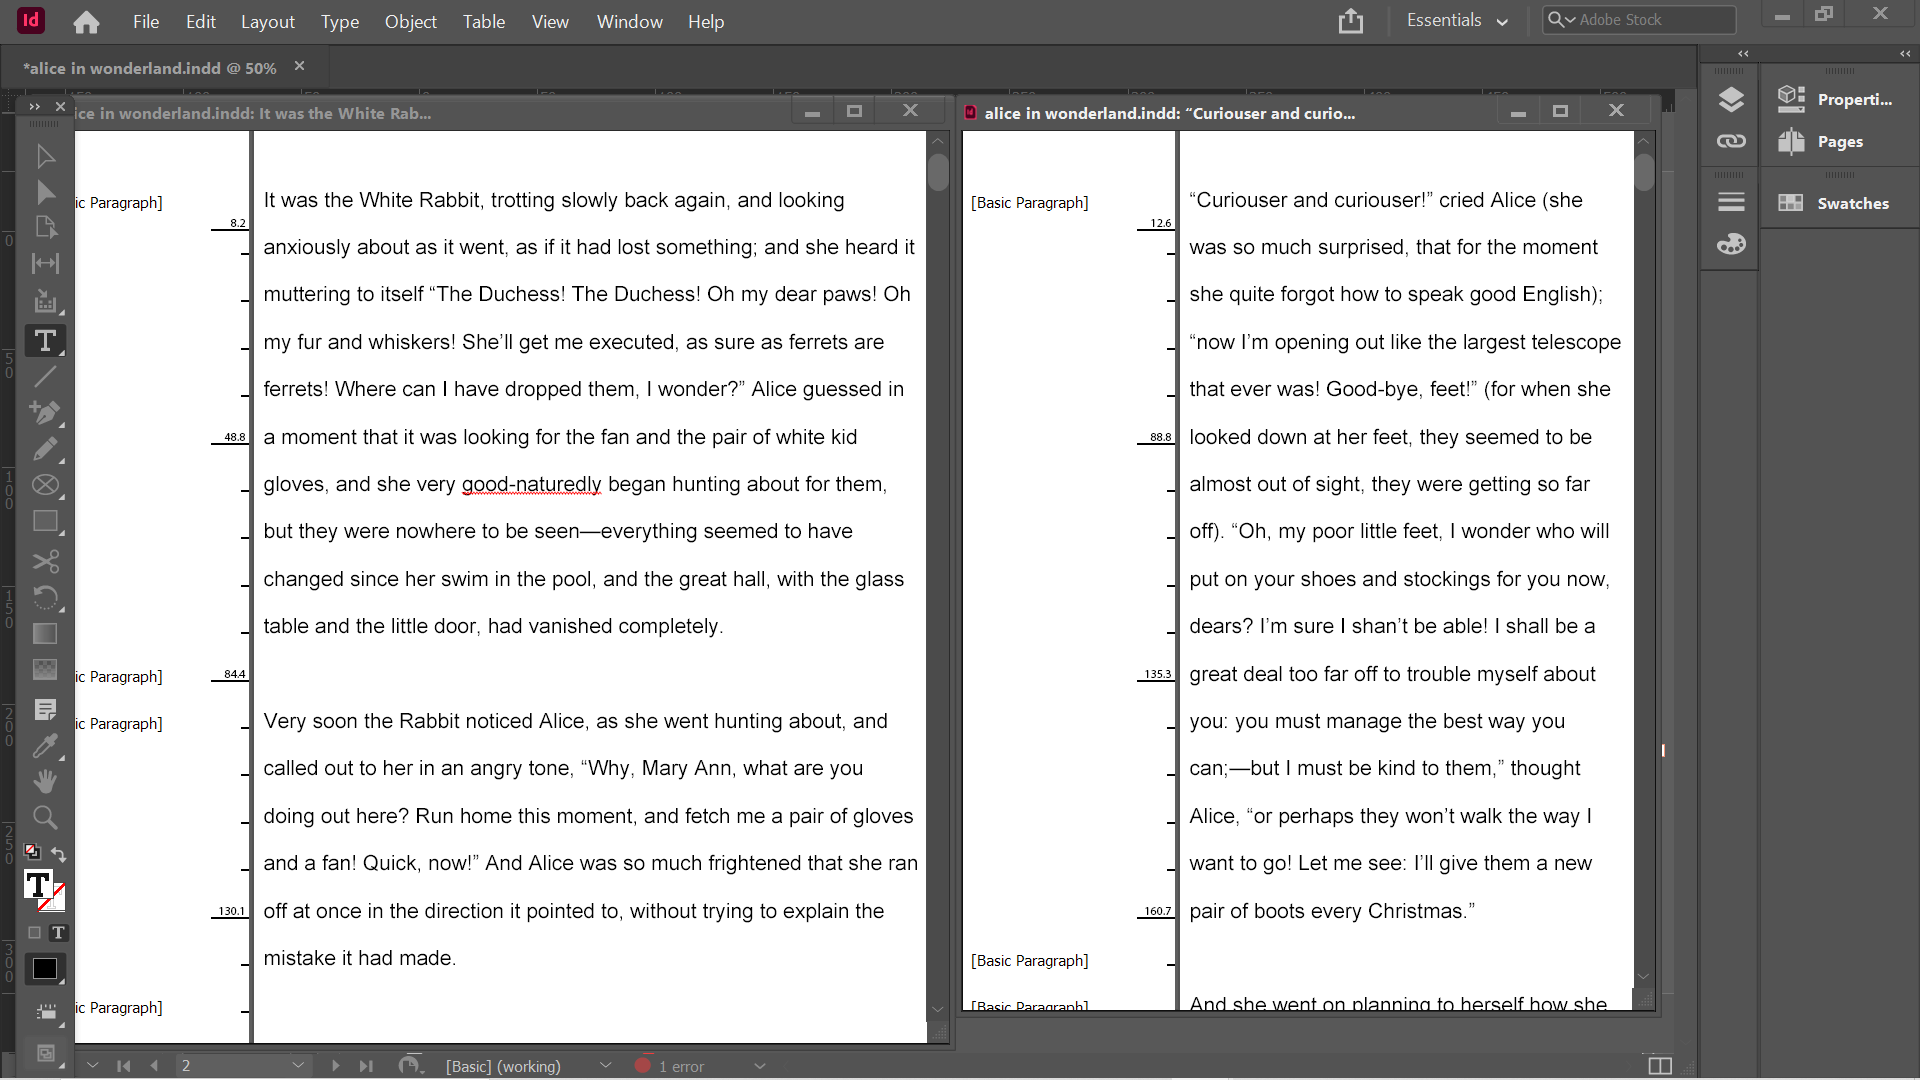 indesign story editor multiple screens - Come utilizzare Adobe InDesign Story Editor